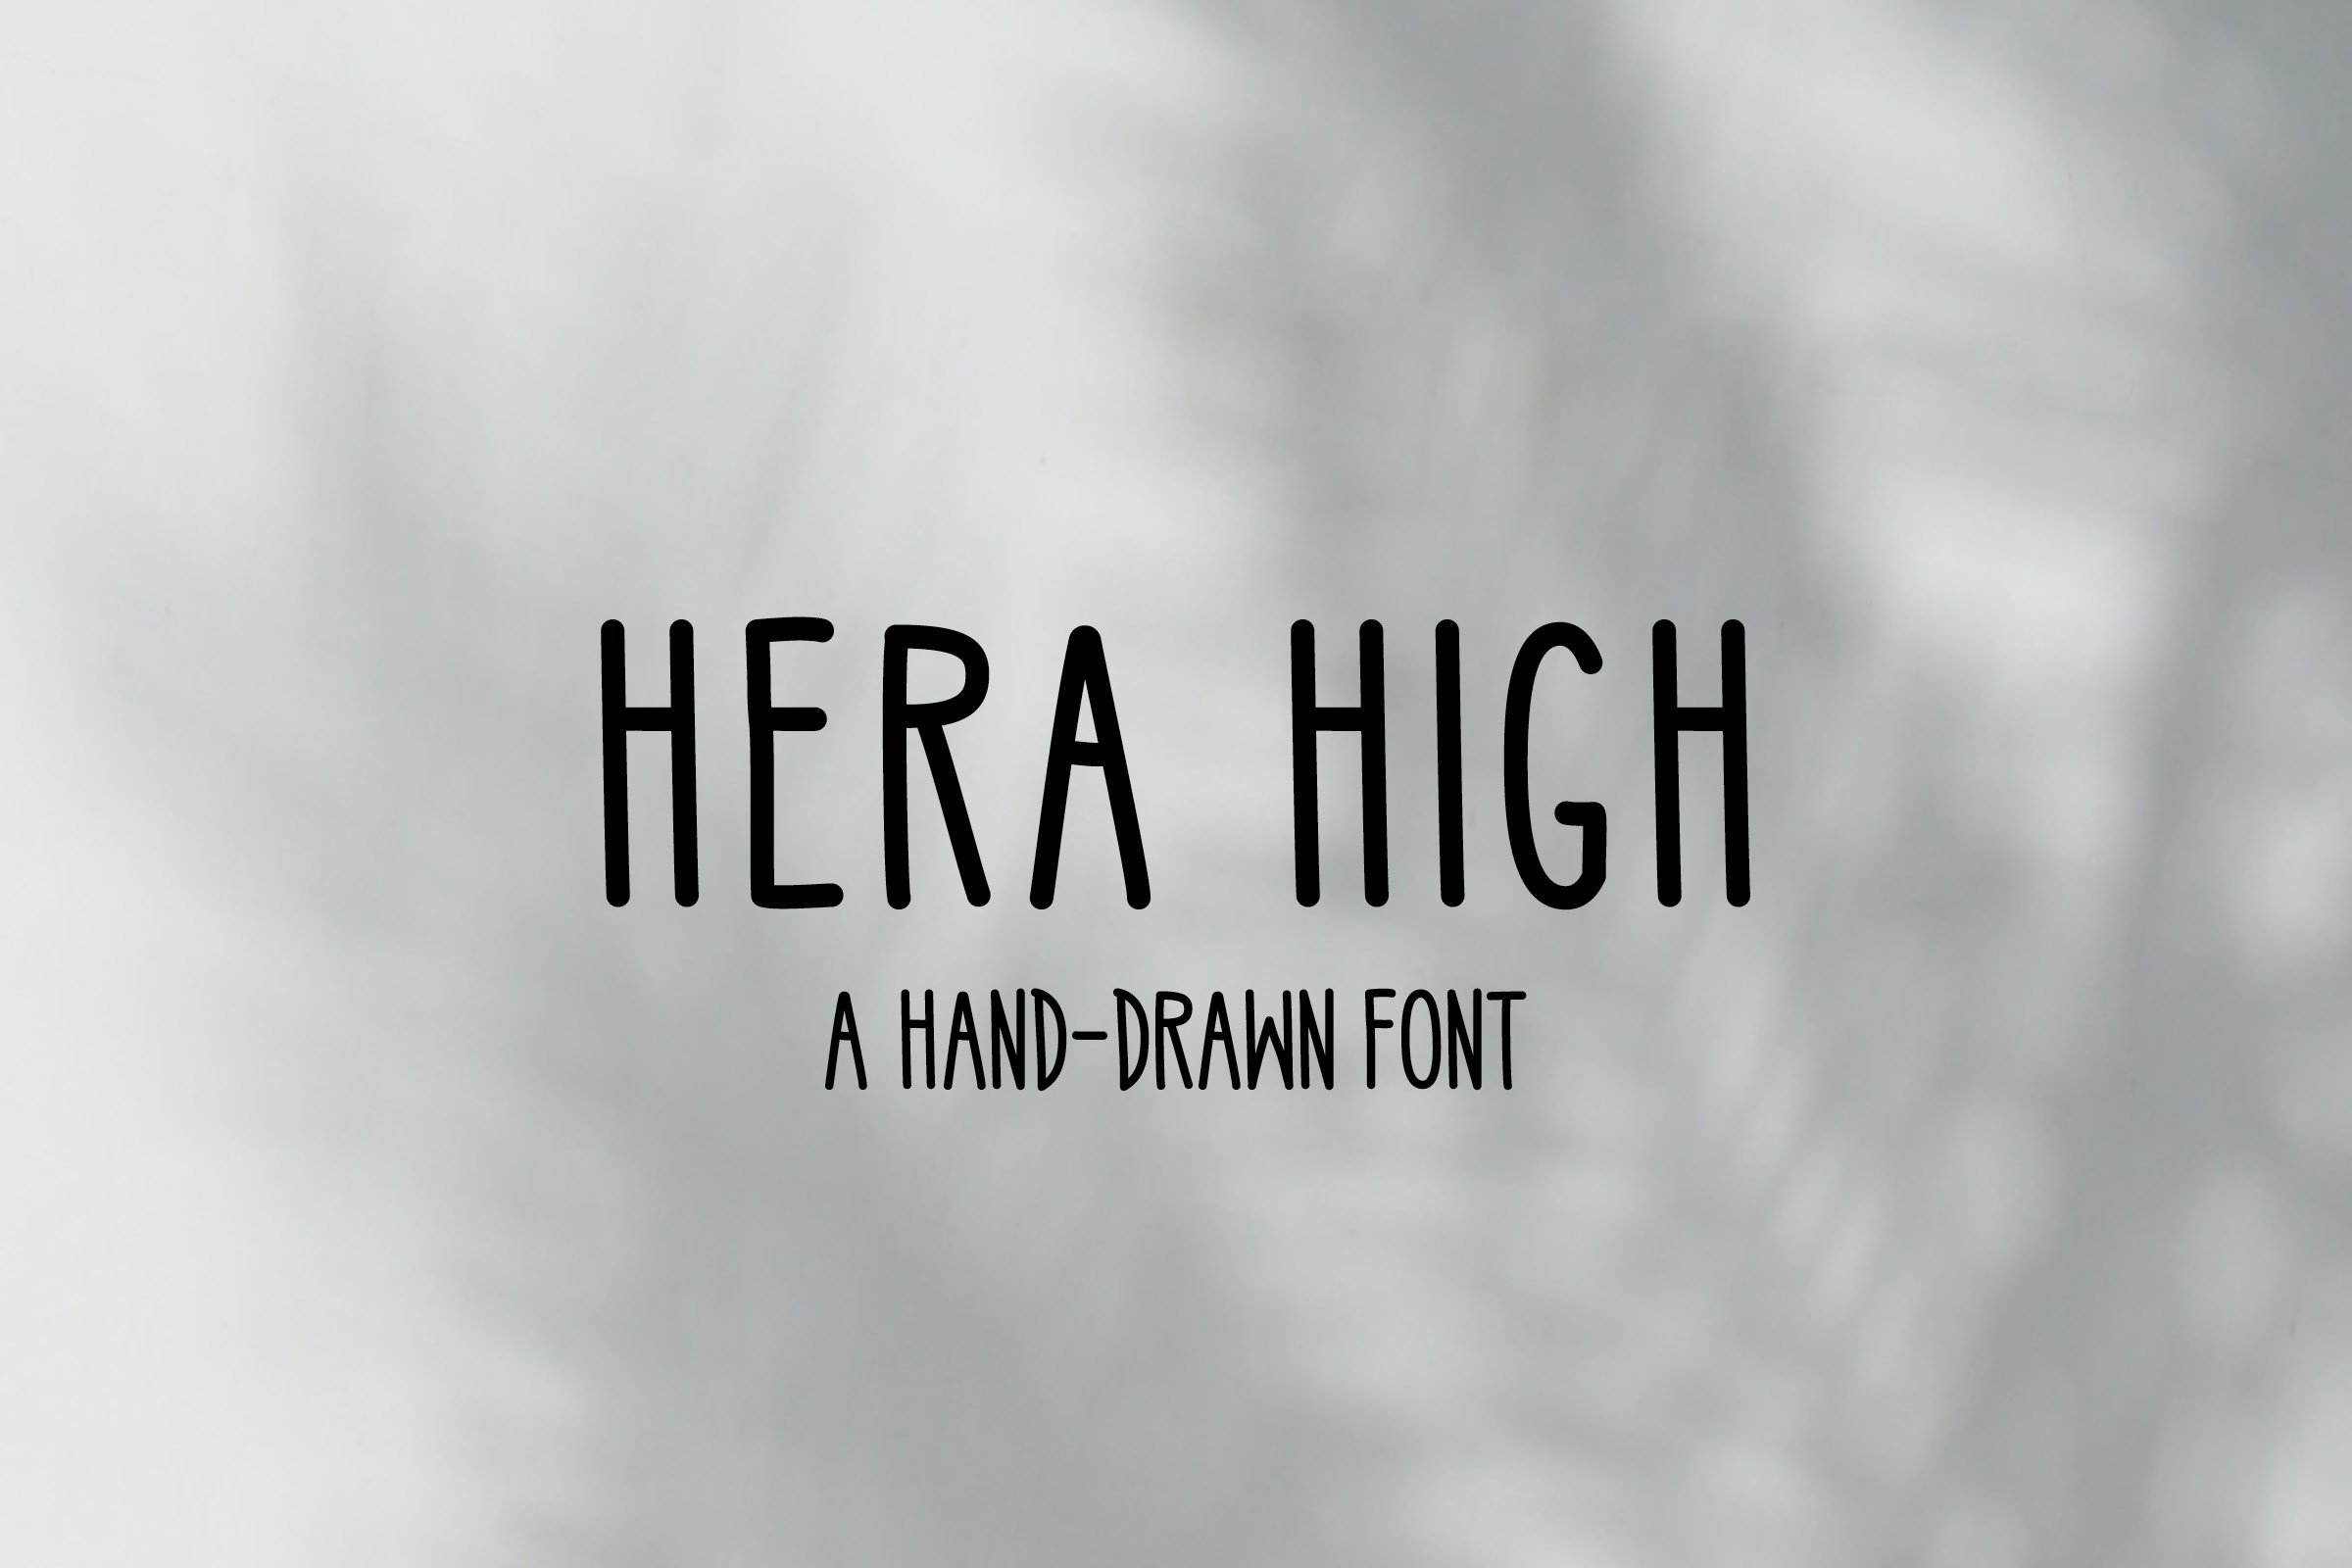 High Hand-Drawn Font, Authentic look cover image.